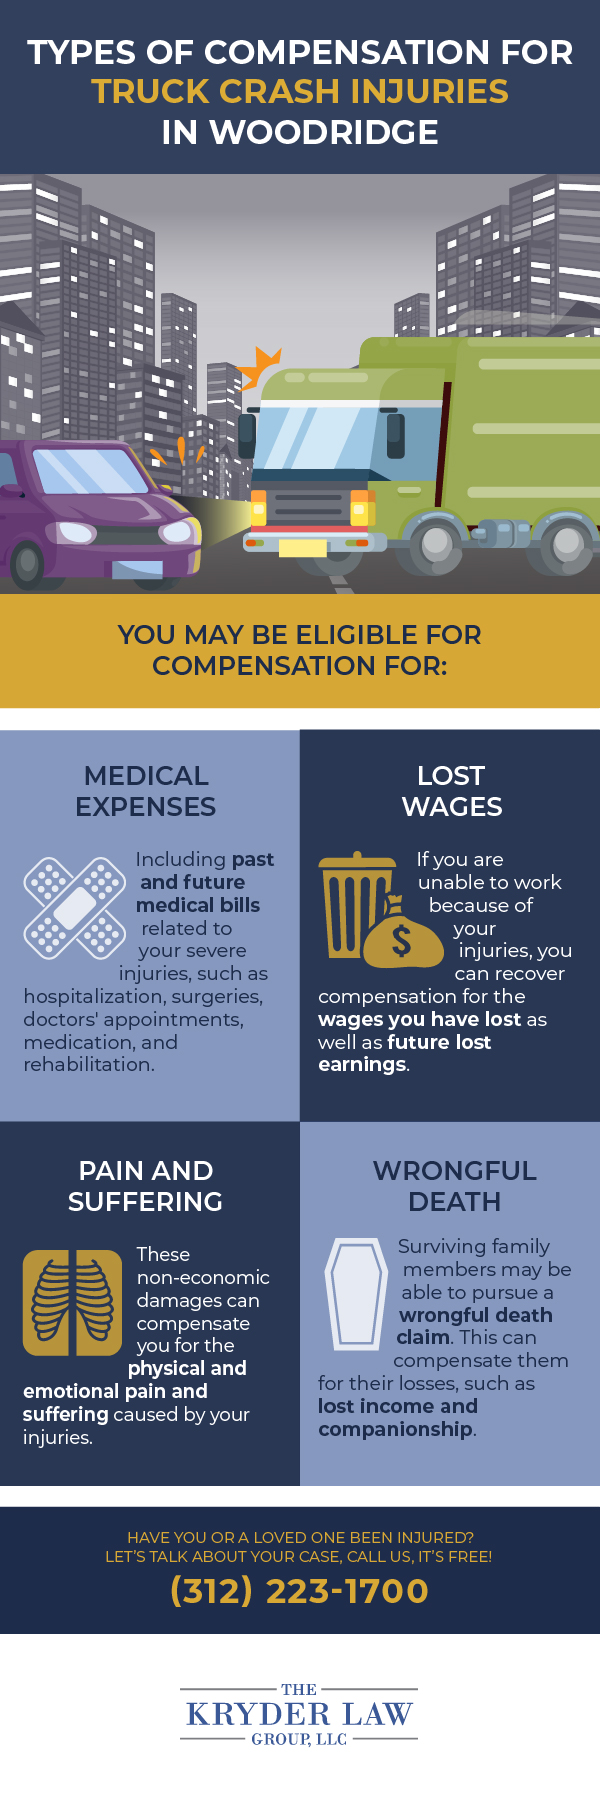 The Benefits of Hiring a Woodridge Truck Accident Lawyer Infographic